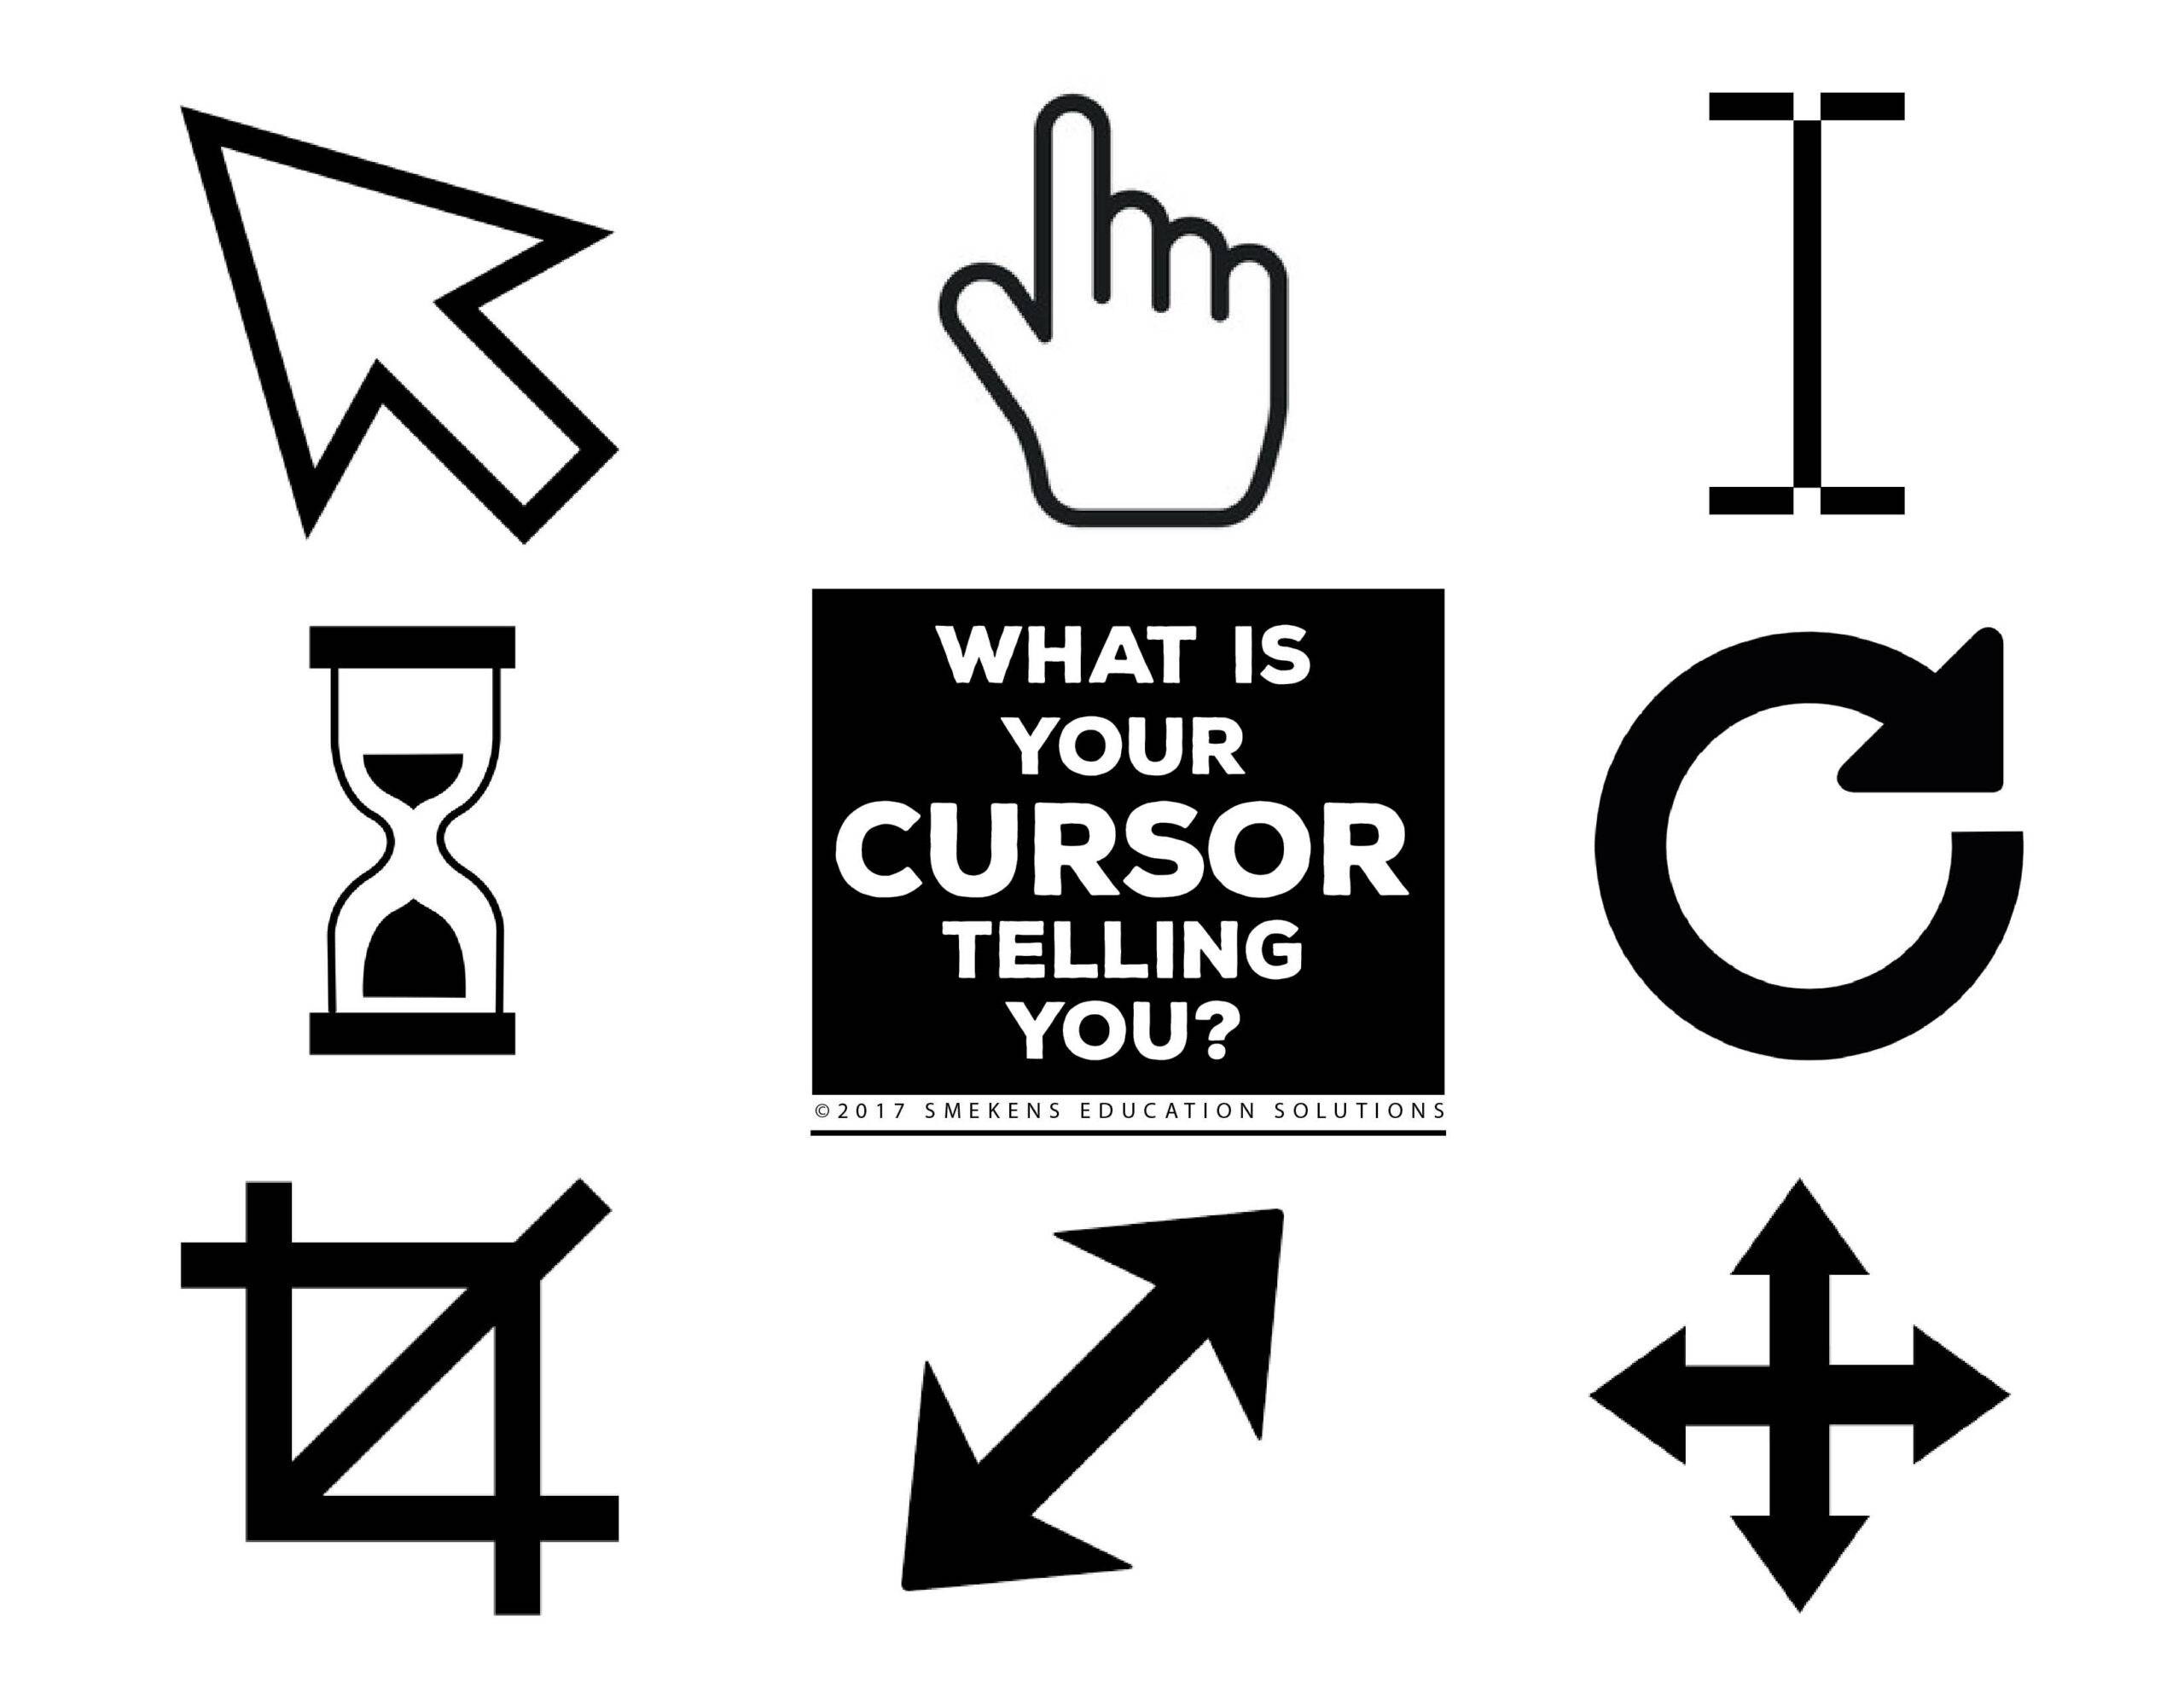 What's your cursor telling you